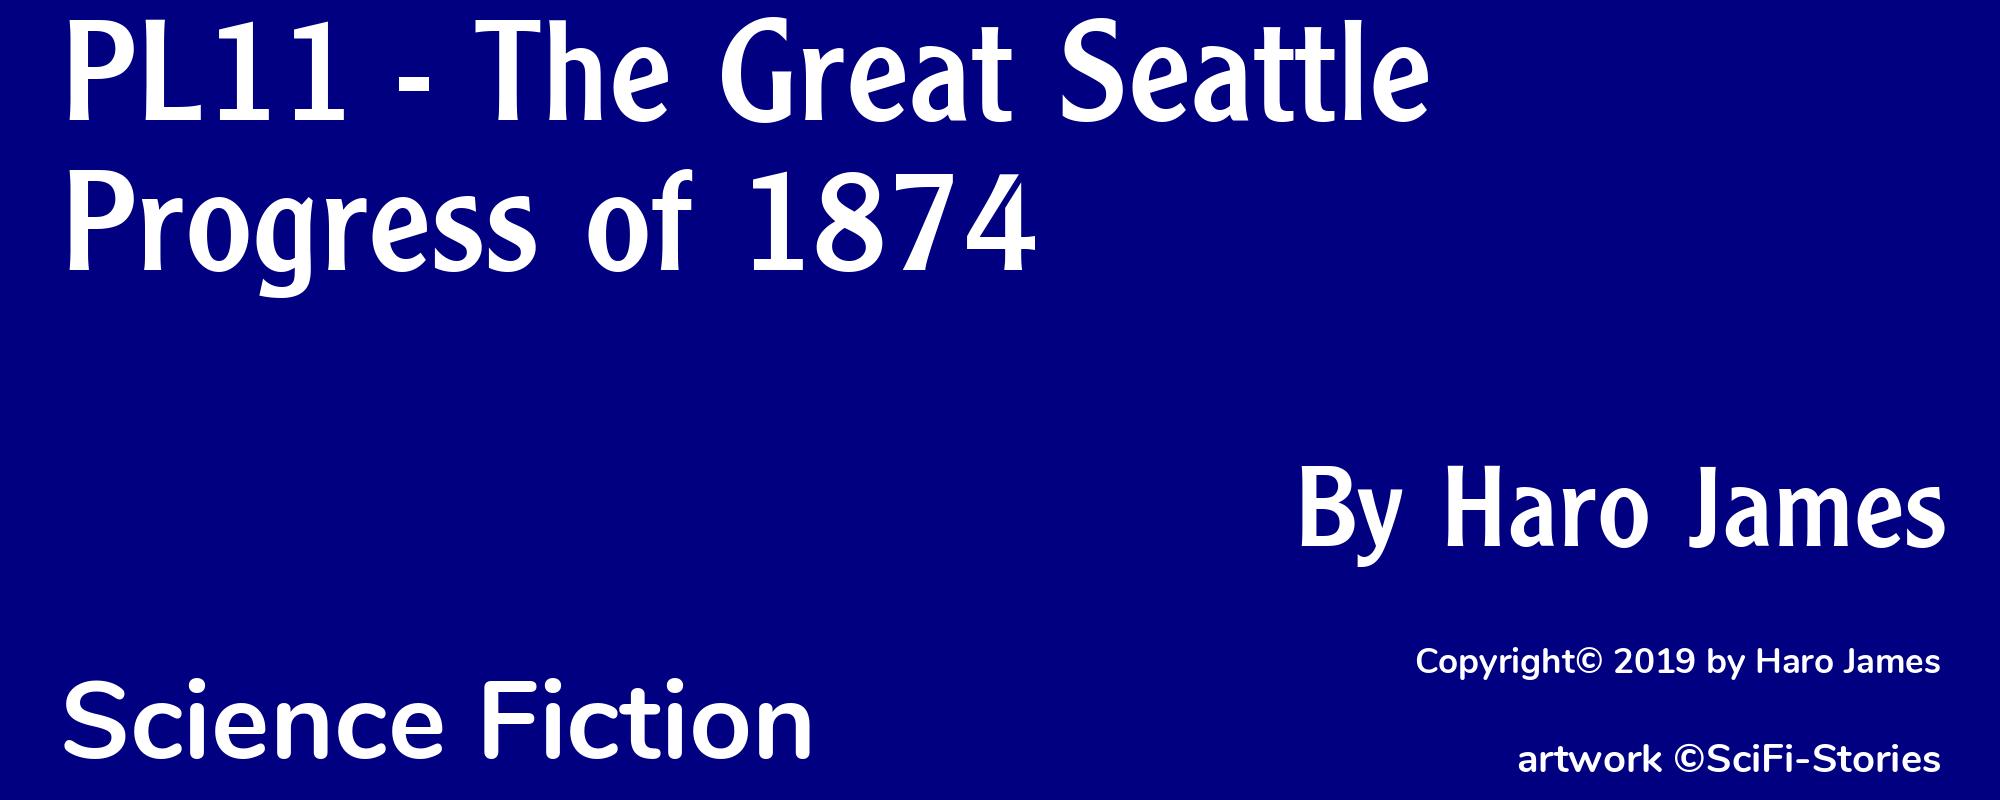 PL11 - The Great Seattle Progress of 1874 - Cover